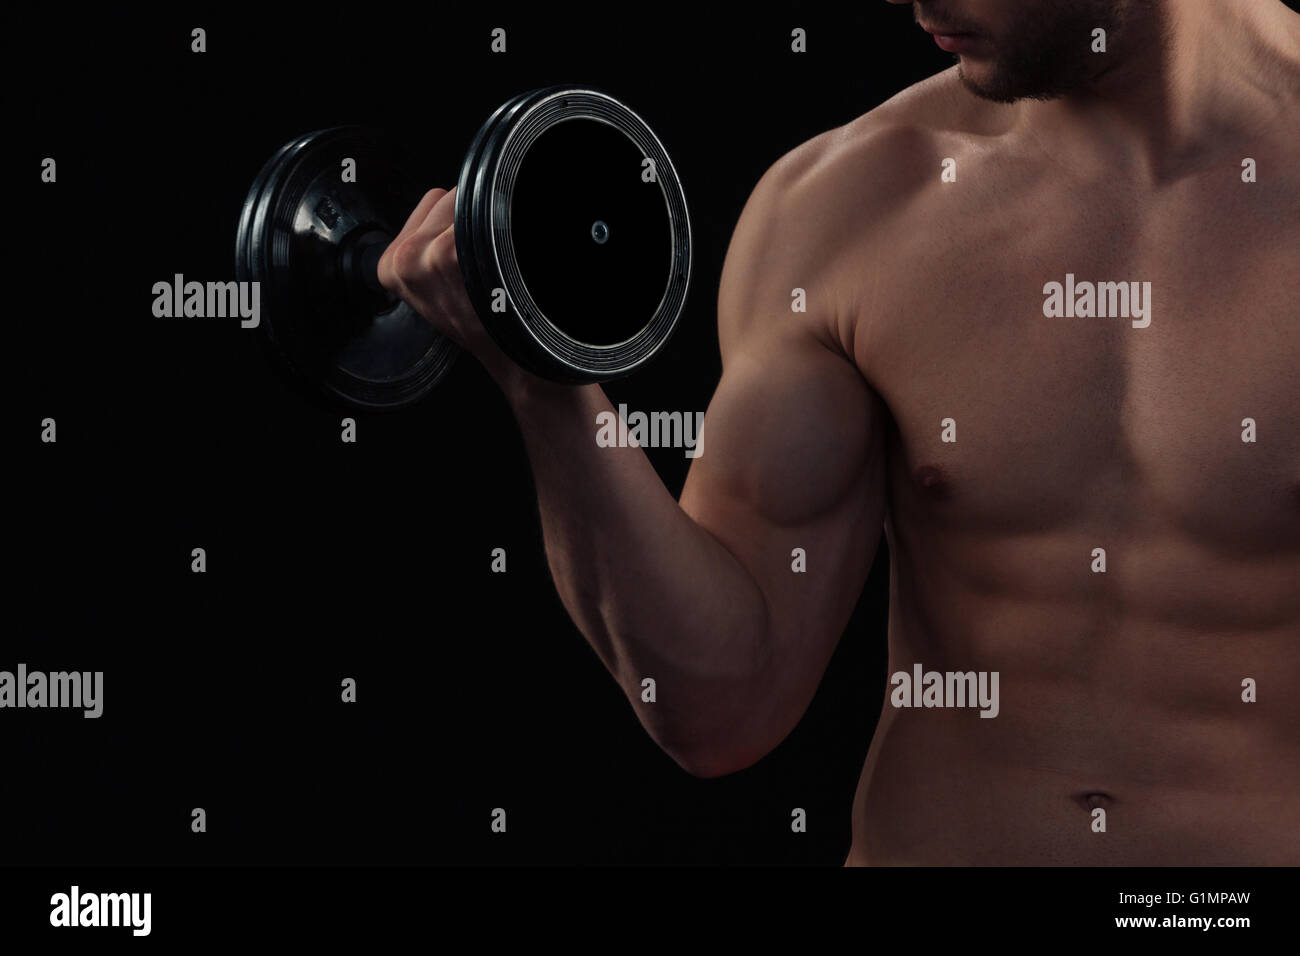 Cropped image of a muscular man workout with dumbbell Stock Photo